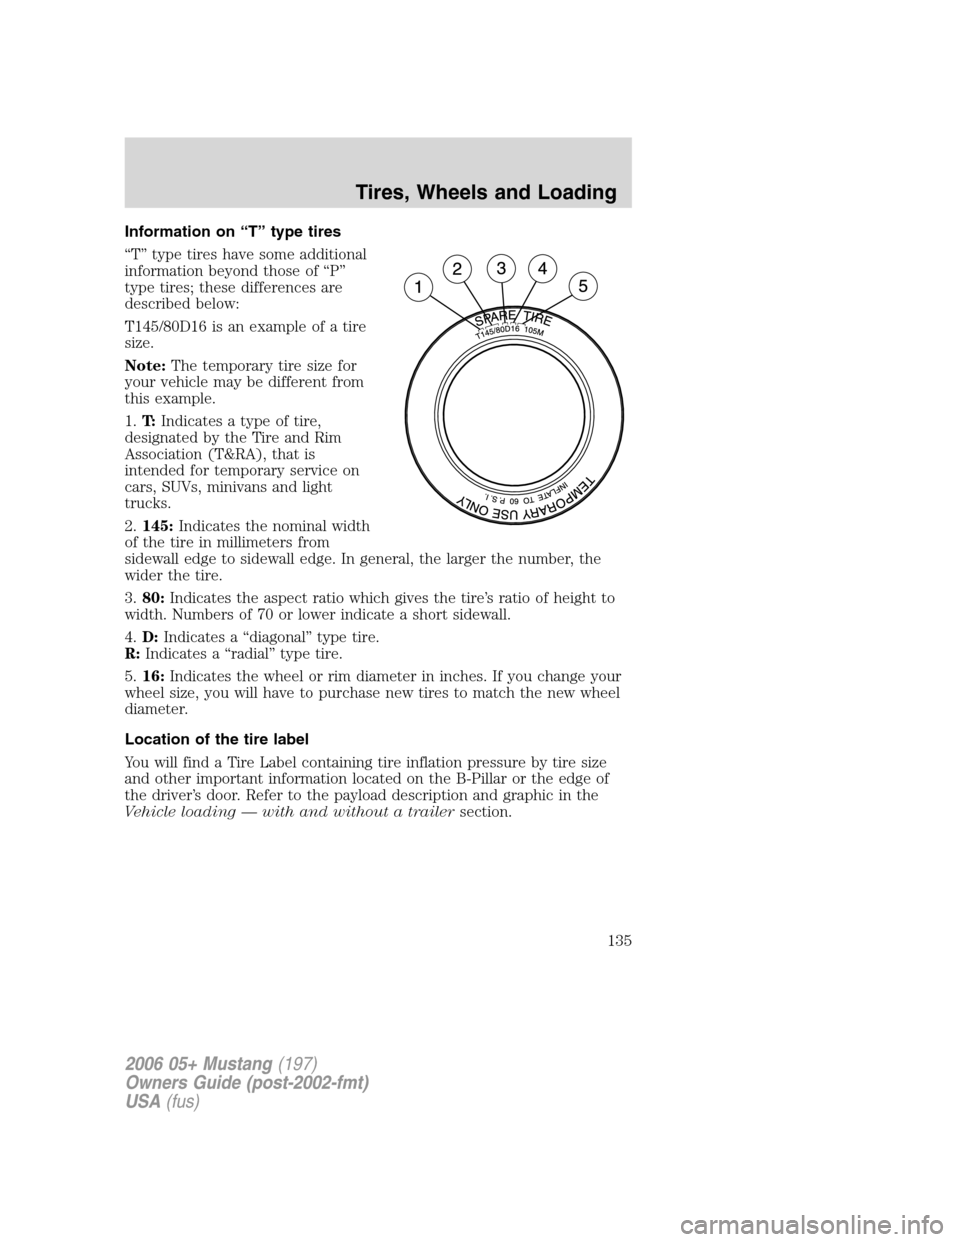 FORD MUSTANG 2006 5.G Owners Manual Information on “T” type tires
“T” type tires have some additional
information beyond those of “P”
type tires; these differences are
described below:
T145/80D16 is an example of a tire
size